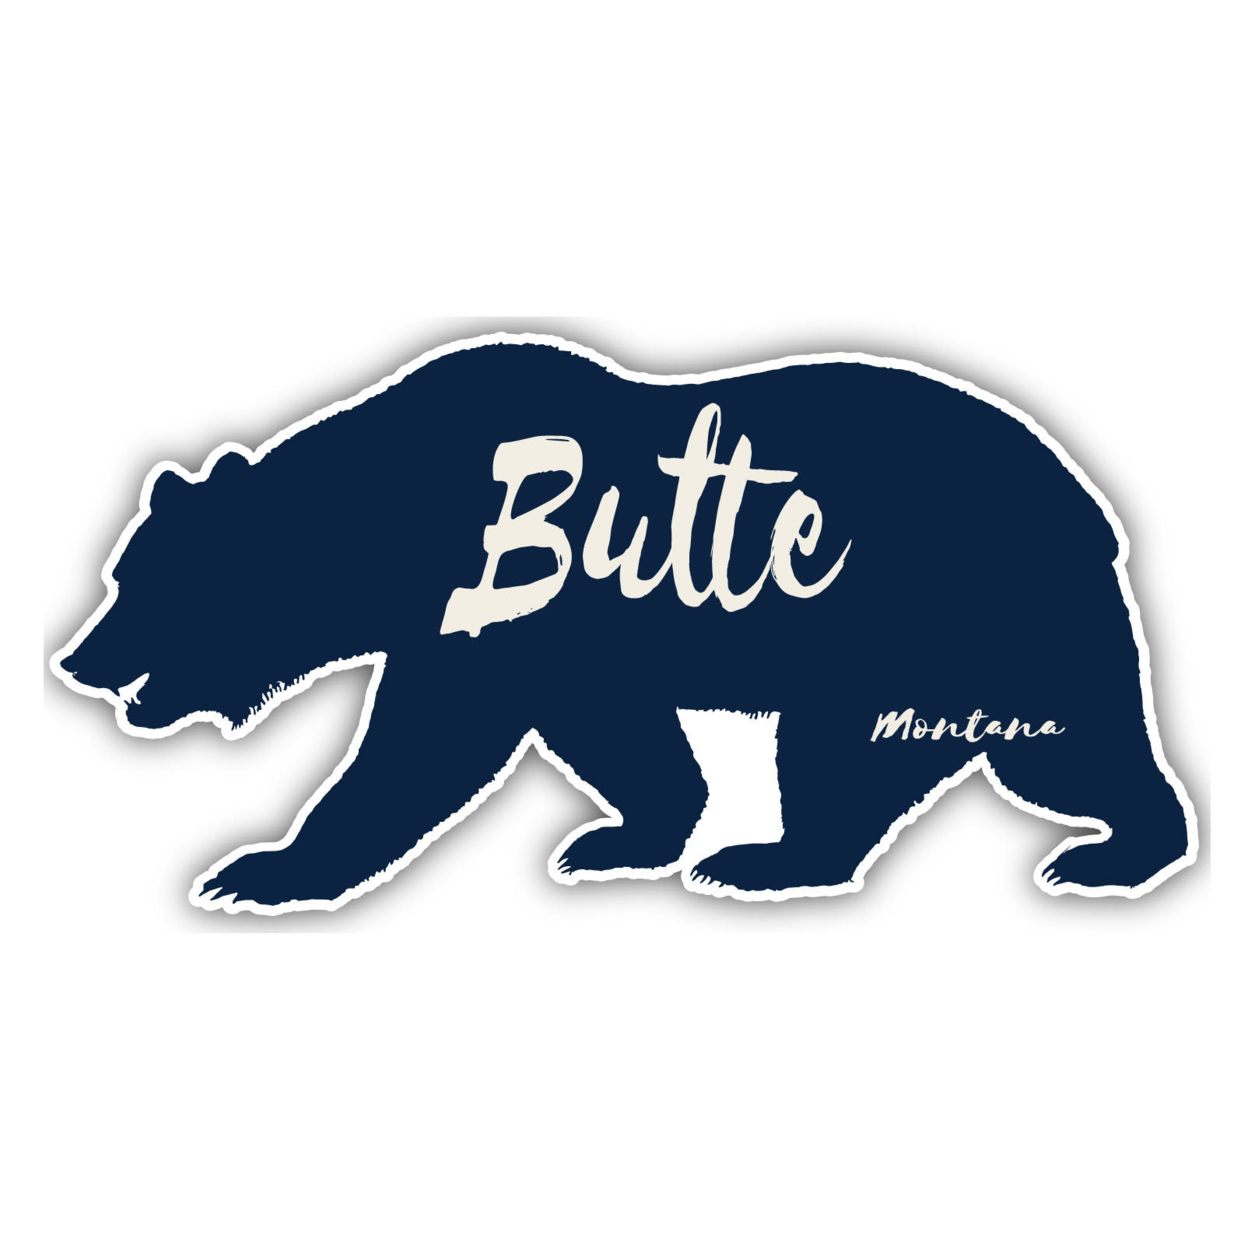 Butte Montana Souvenir Decorative Stickers (Choose Theme And Size) - 4-Pack, 4-Inch, Bear